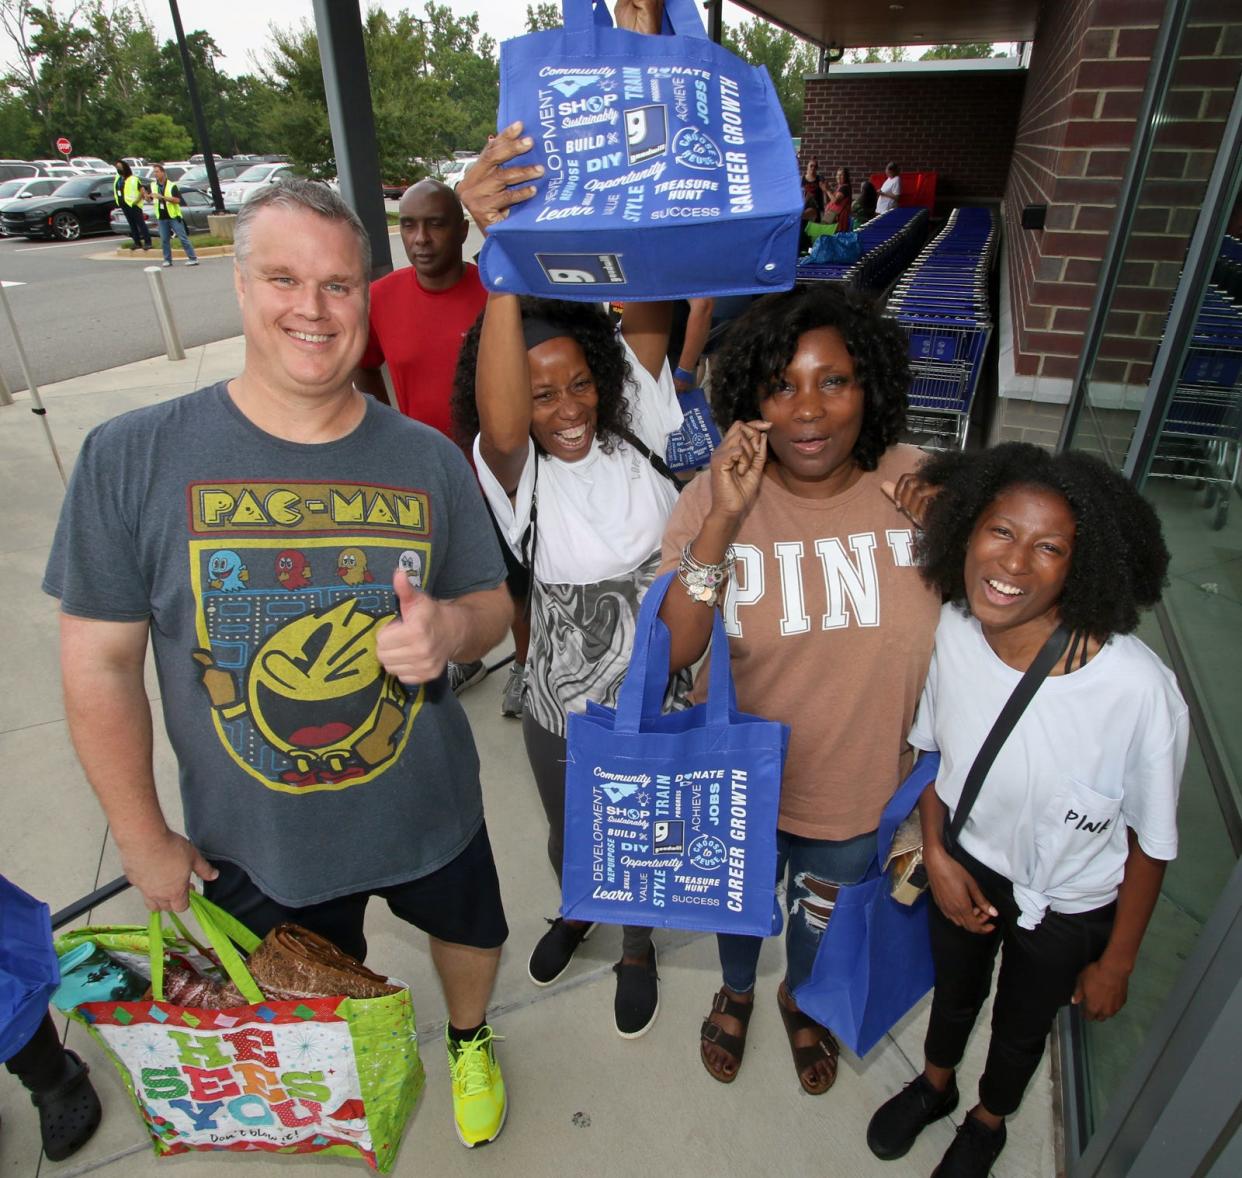 Michael McDaniel, Angela Bates, Alene Bates and Malika Bates arrived at 4 a.m. so they would be the first customers inside the new Goodwill store on East Dixon Boulevard Friday morning, August 26, 2022.